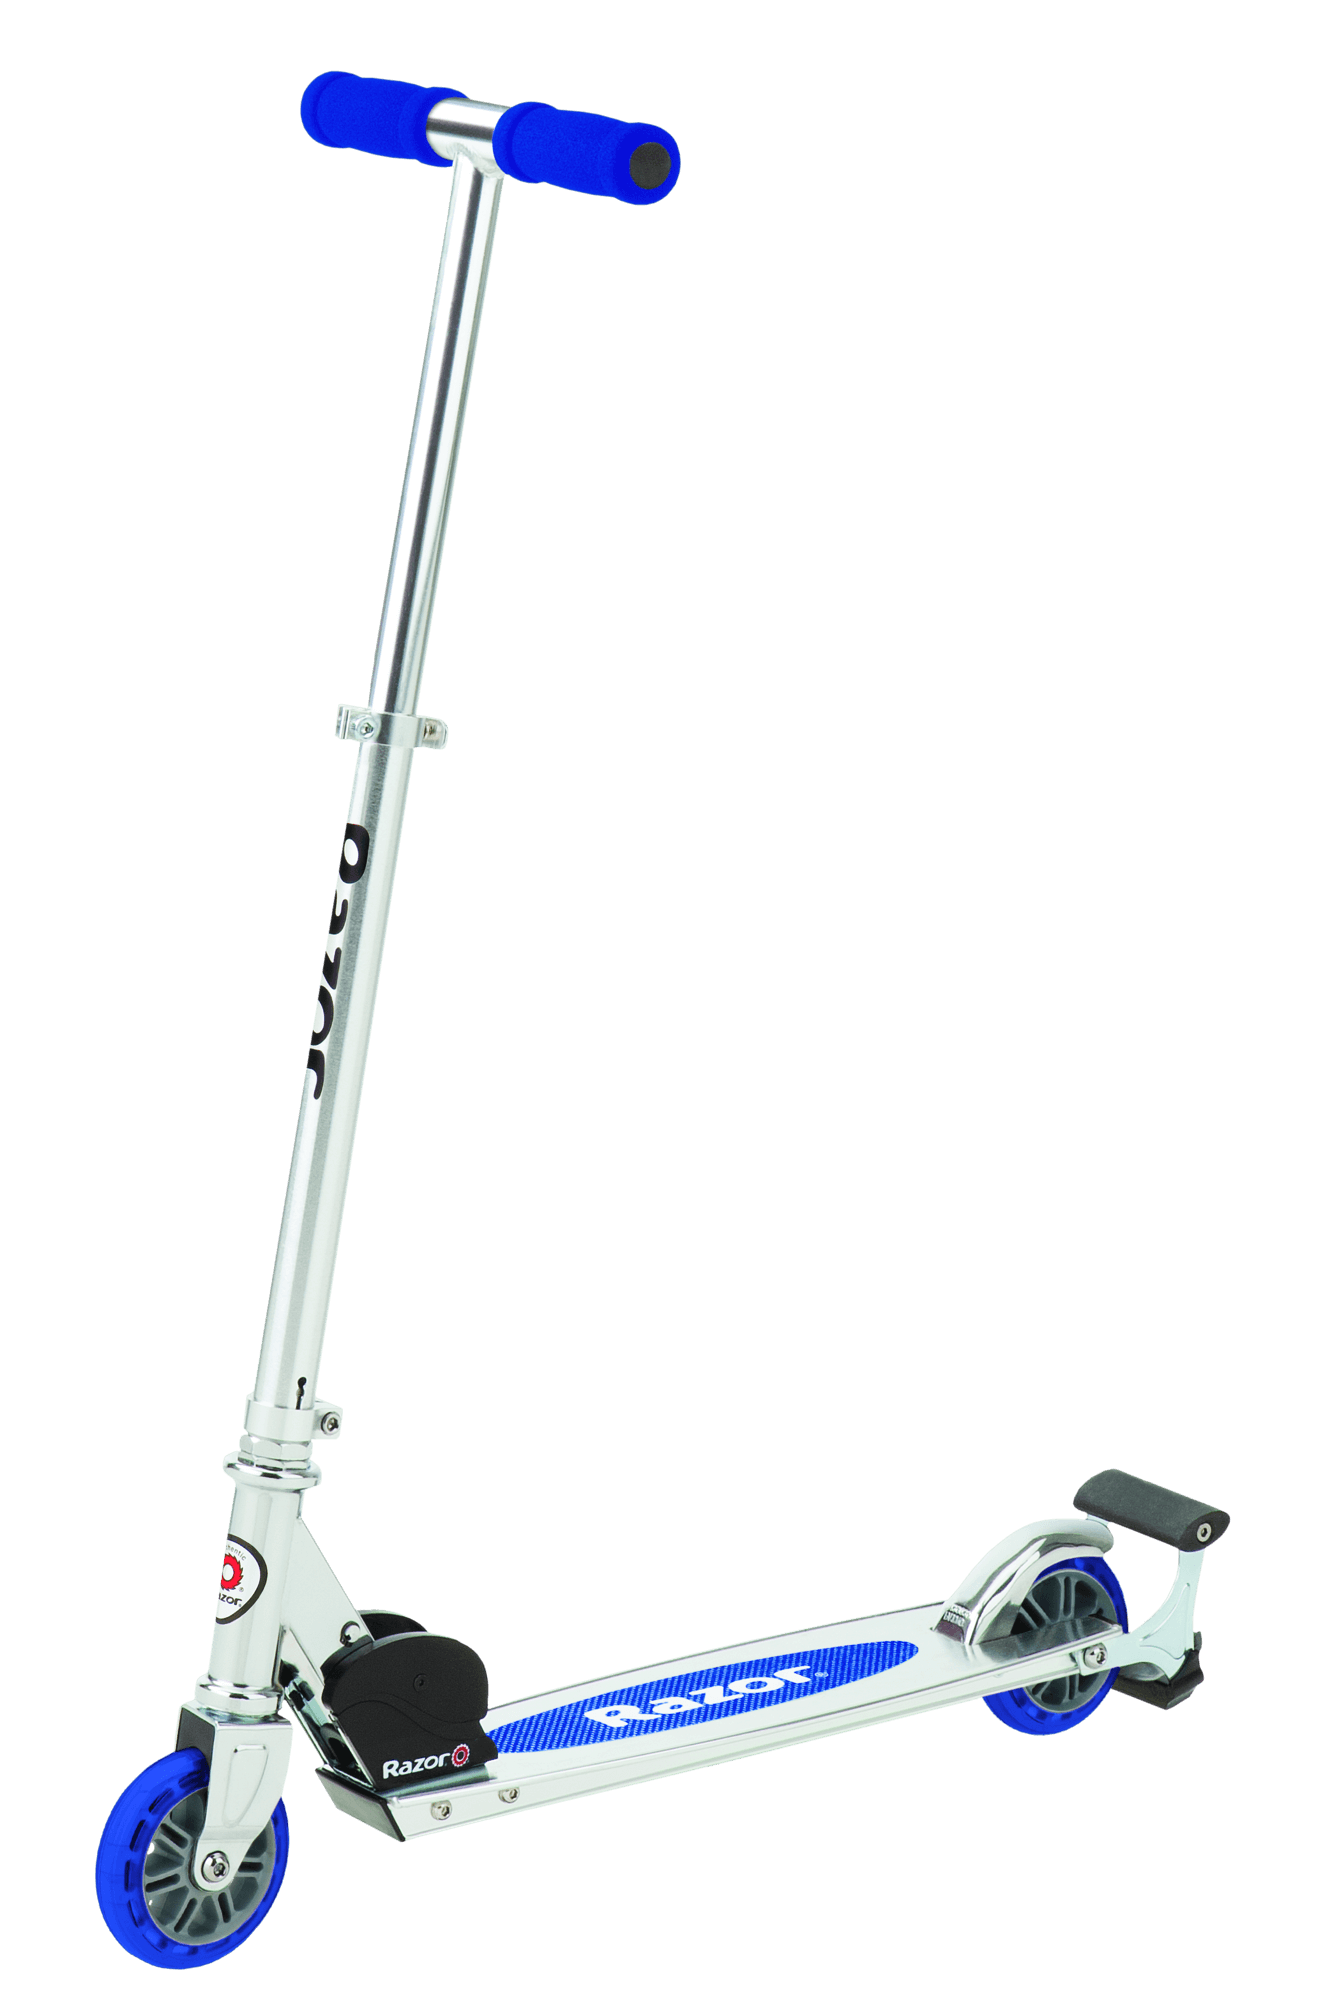 Kick Scooter Download PNG Image